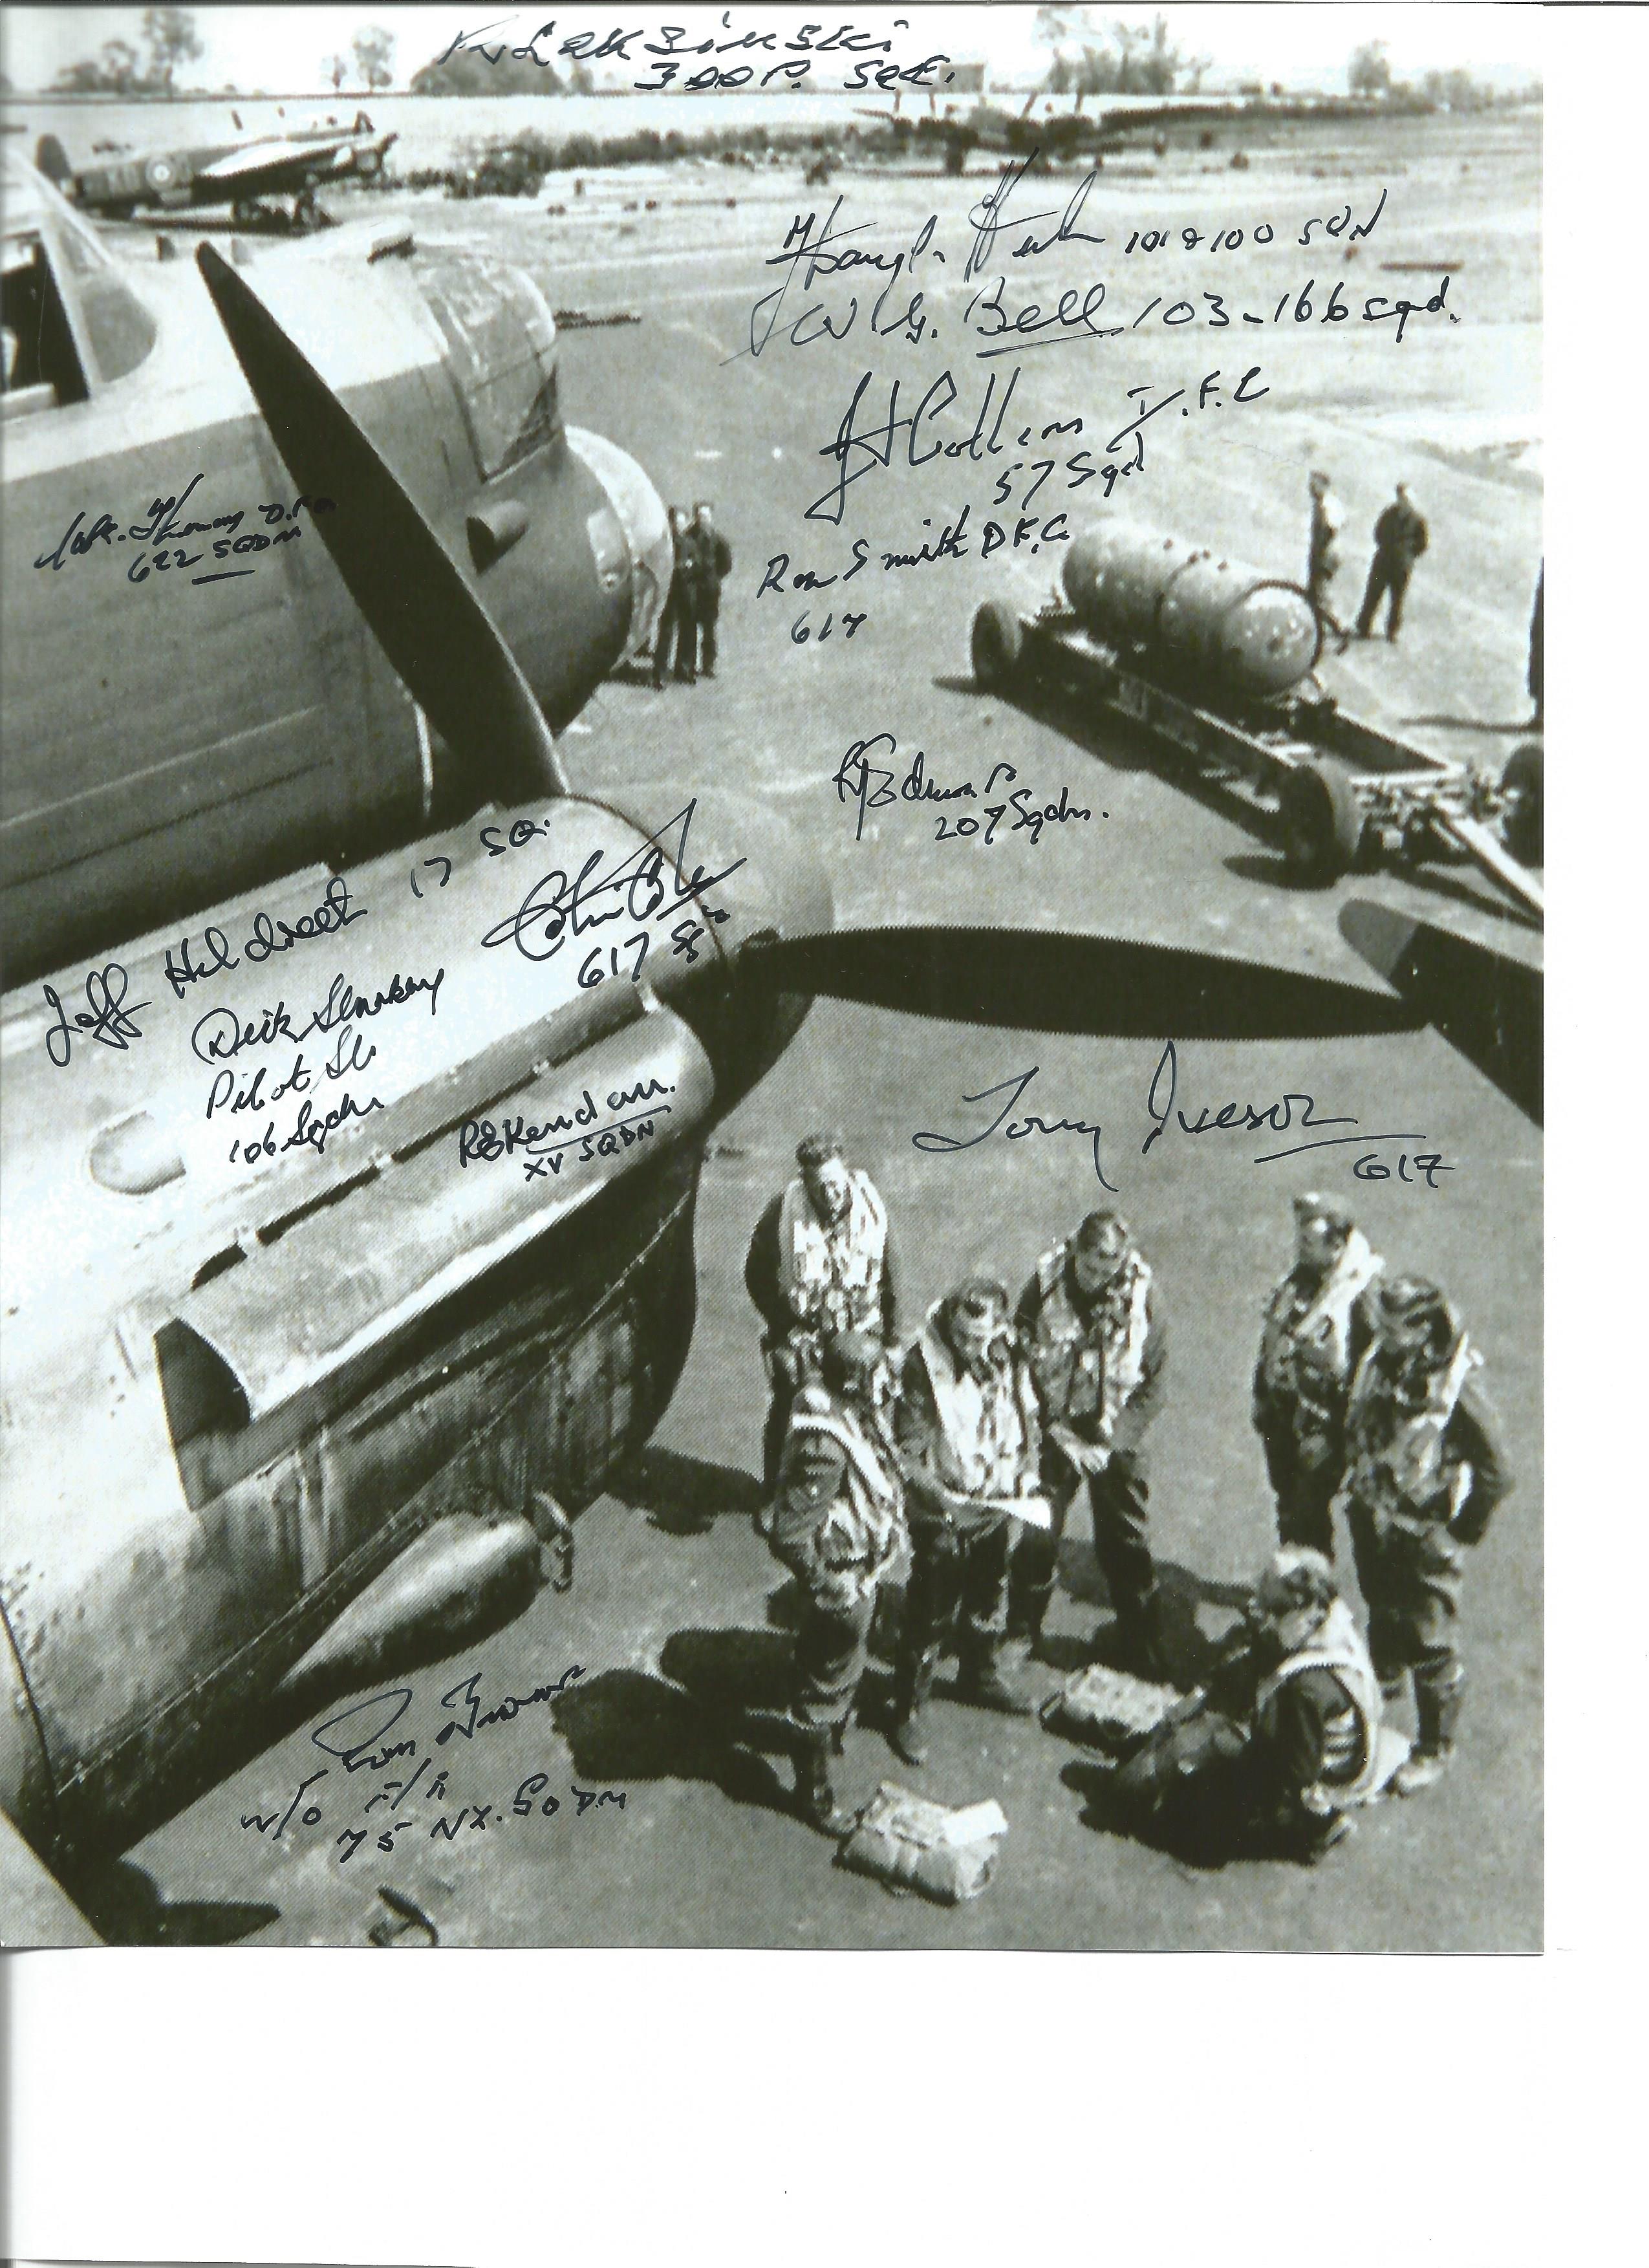 Multi signed 10x8 black and white Lancaster photo. Signed by 13 Bomber command veterans. Includes